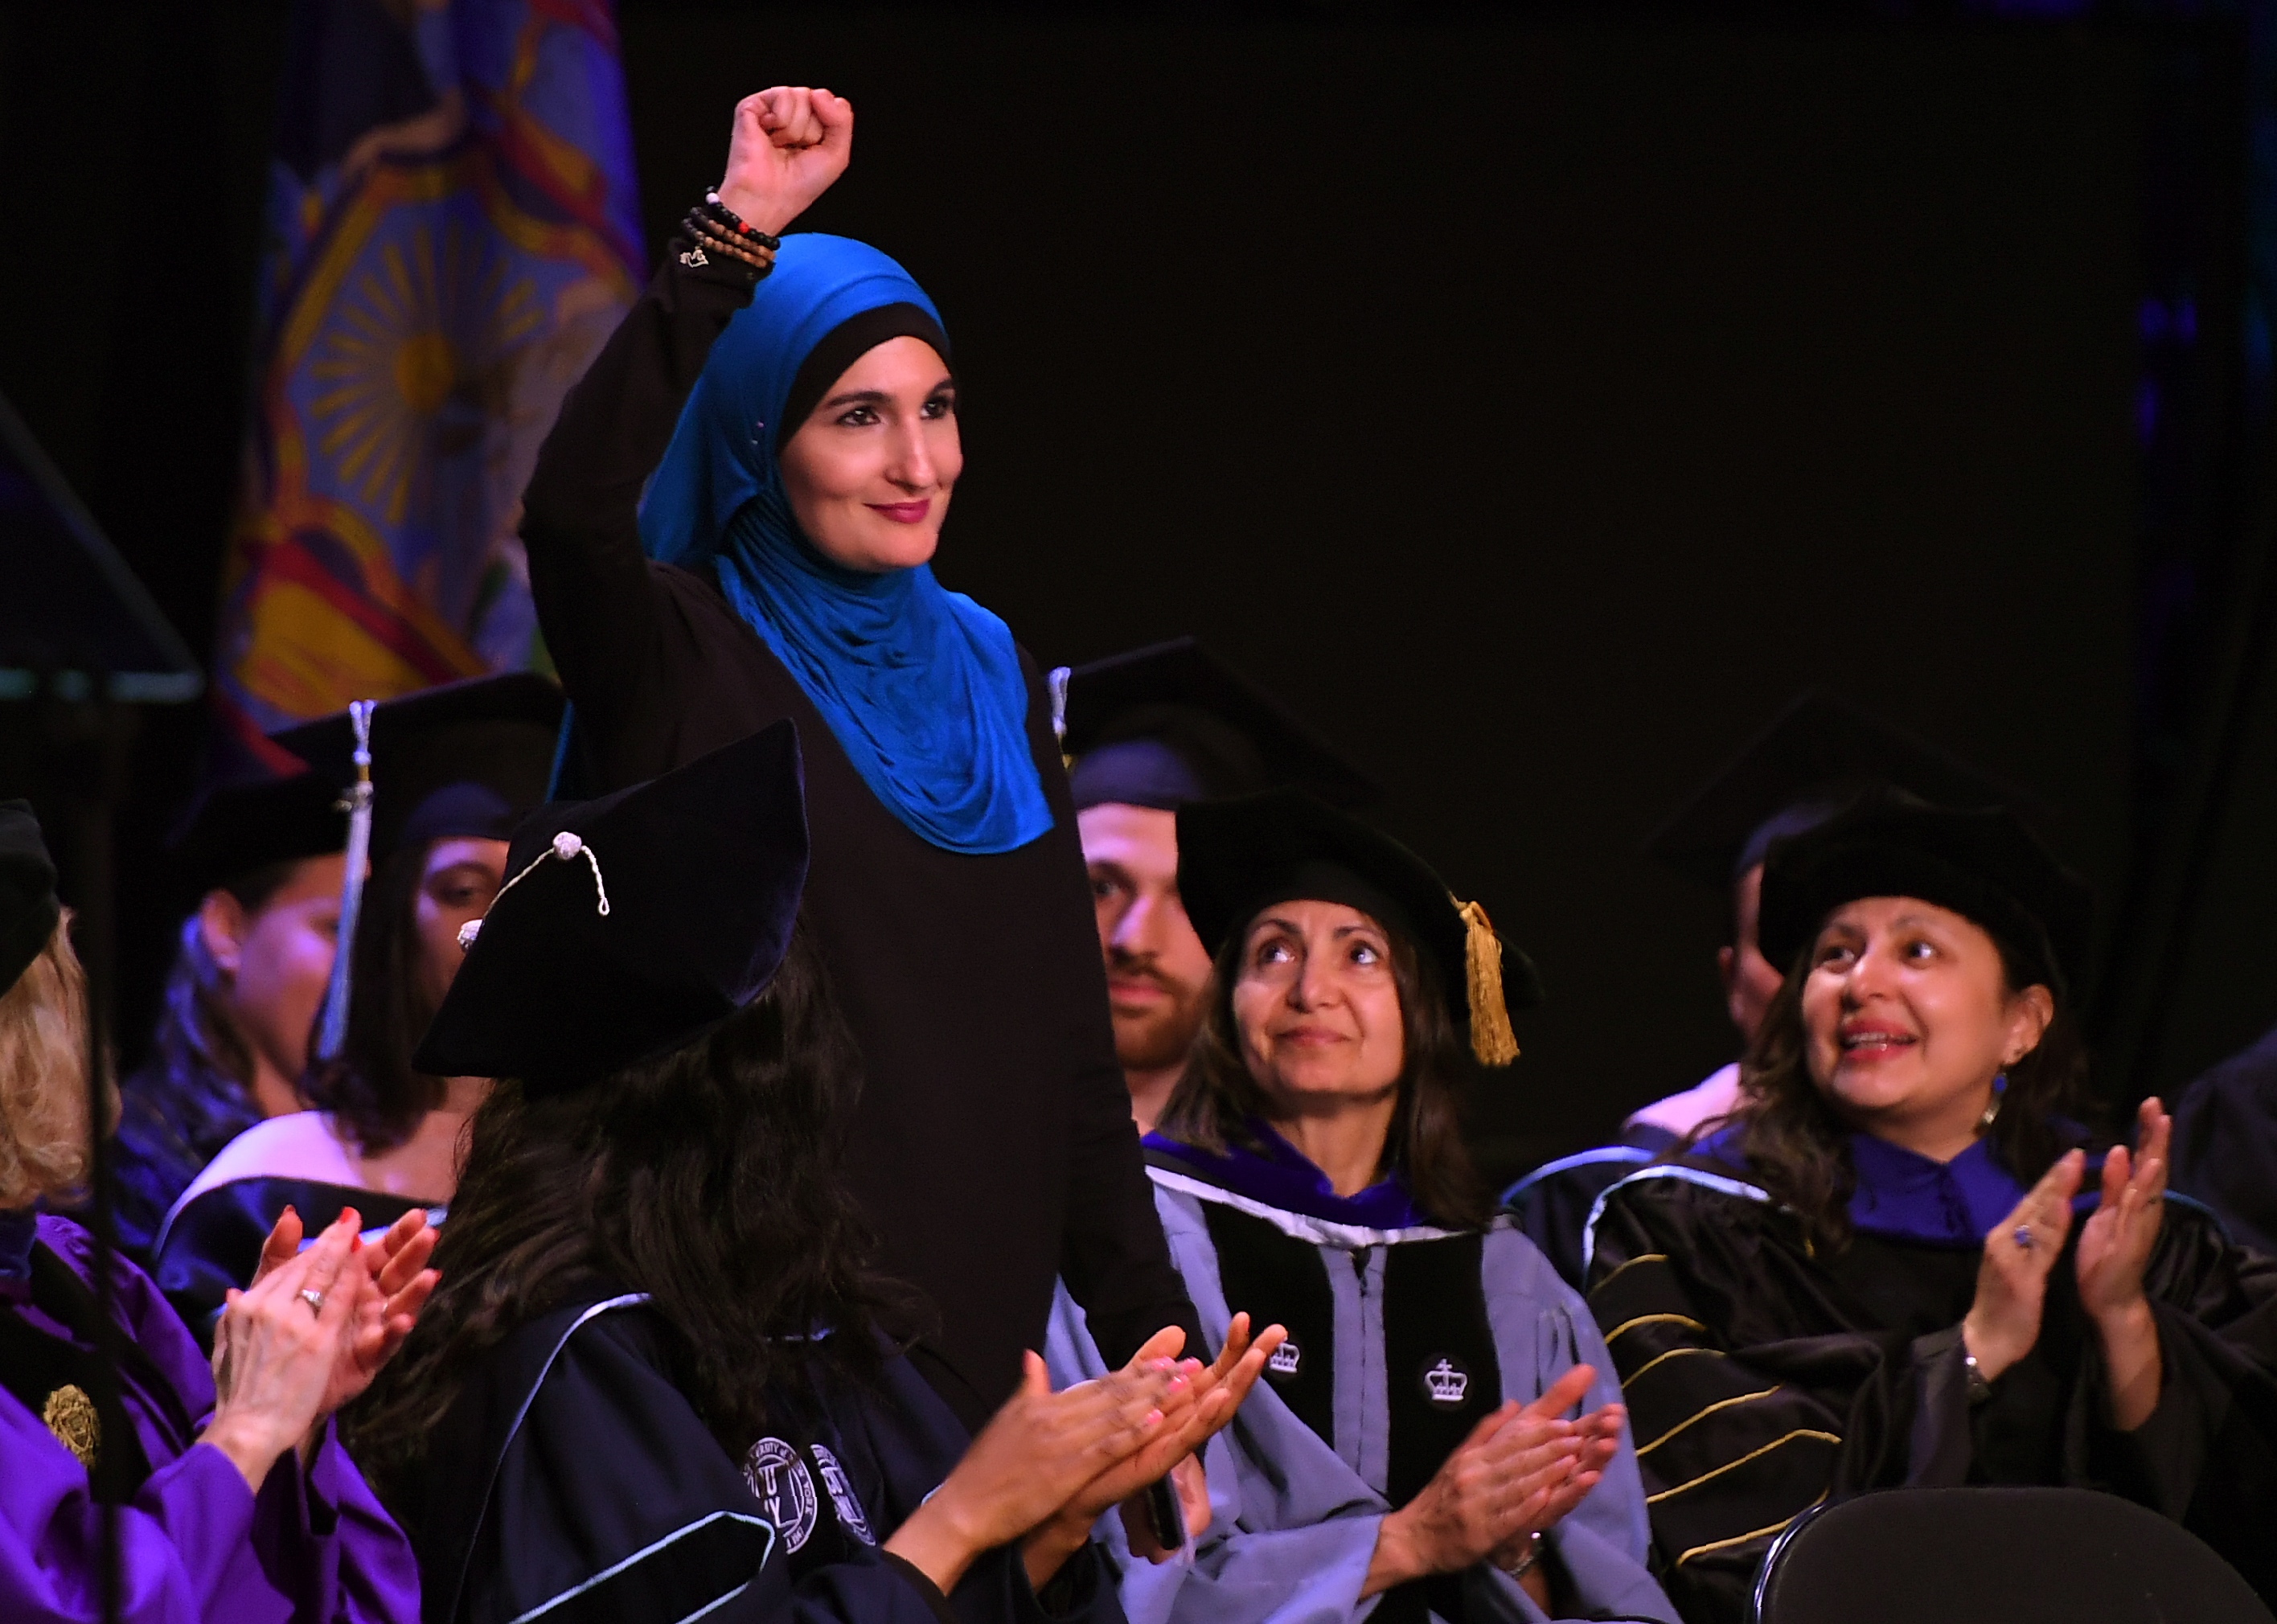 Linda Sarsour, co-organizer of the National Women's March, raises her fist as she walks to the stage to deliver the keynote address at the CUNY School of Public Health commencement ceremony on June 1, 2017 at the Apollo Theatre in Harlem. (Timothy A. Clary—AFP/Getty Images)